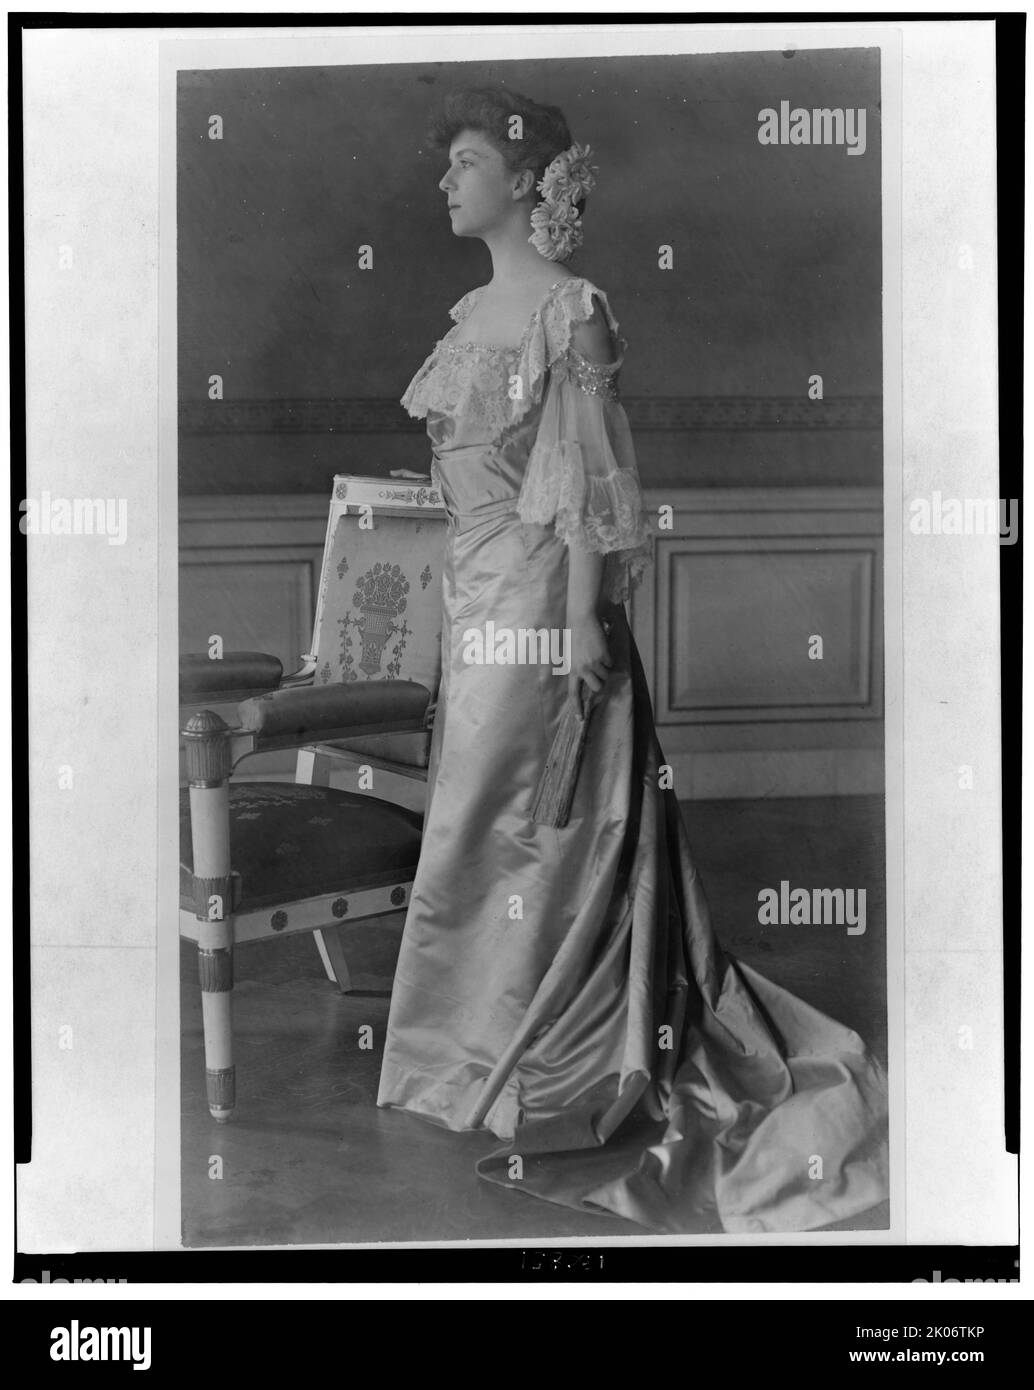 Alice Roosevelt Longworth, full-length portrait, standing next to chair, facing left, 1903. [Daughter of President Theodore Roosevelt and his first wife Alice Hathaway Lee]. Stock Photo